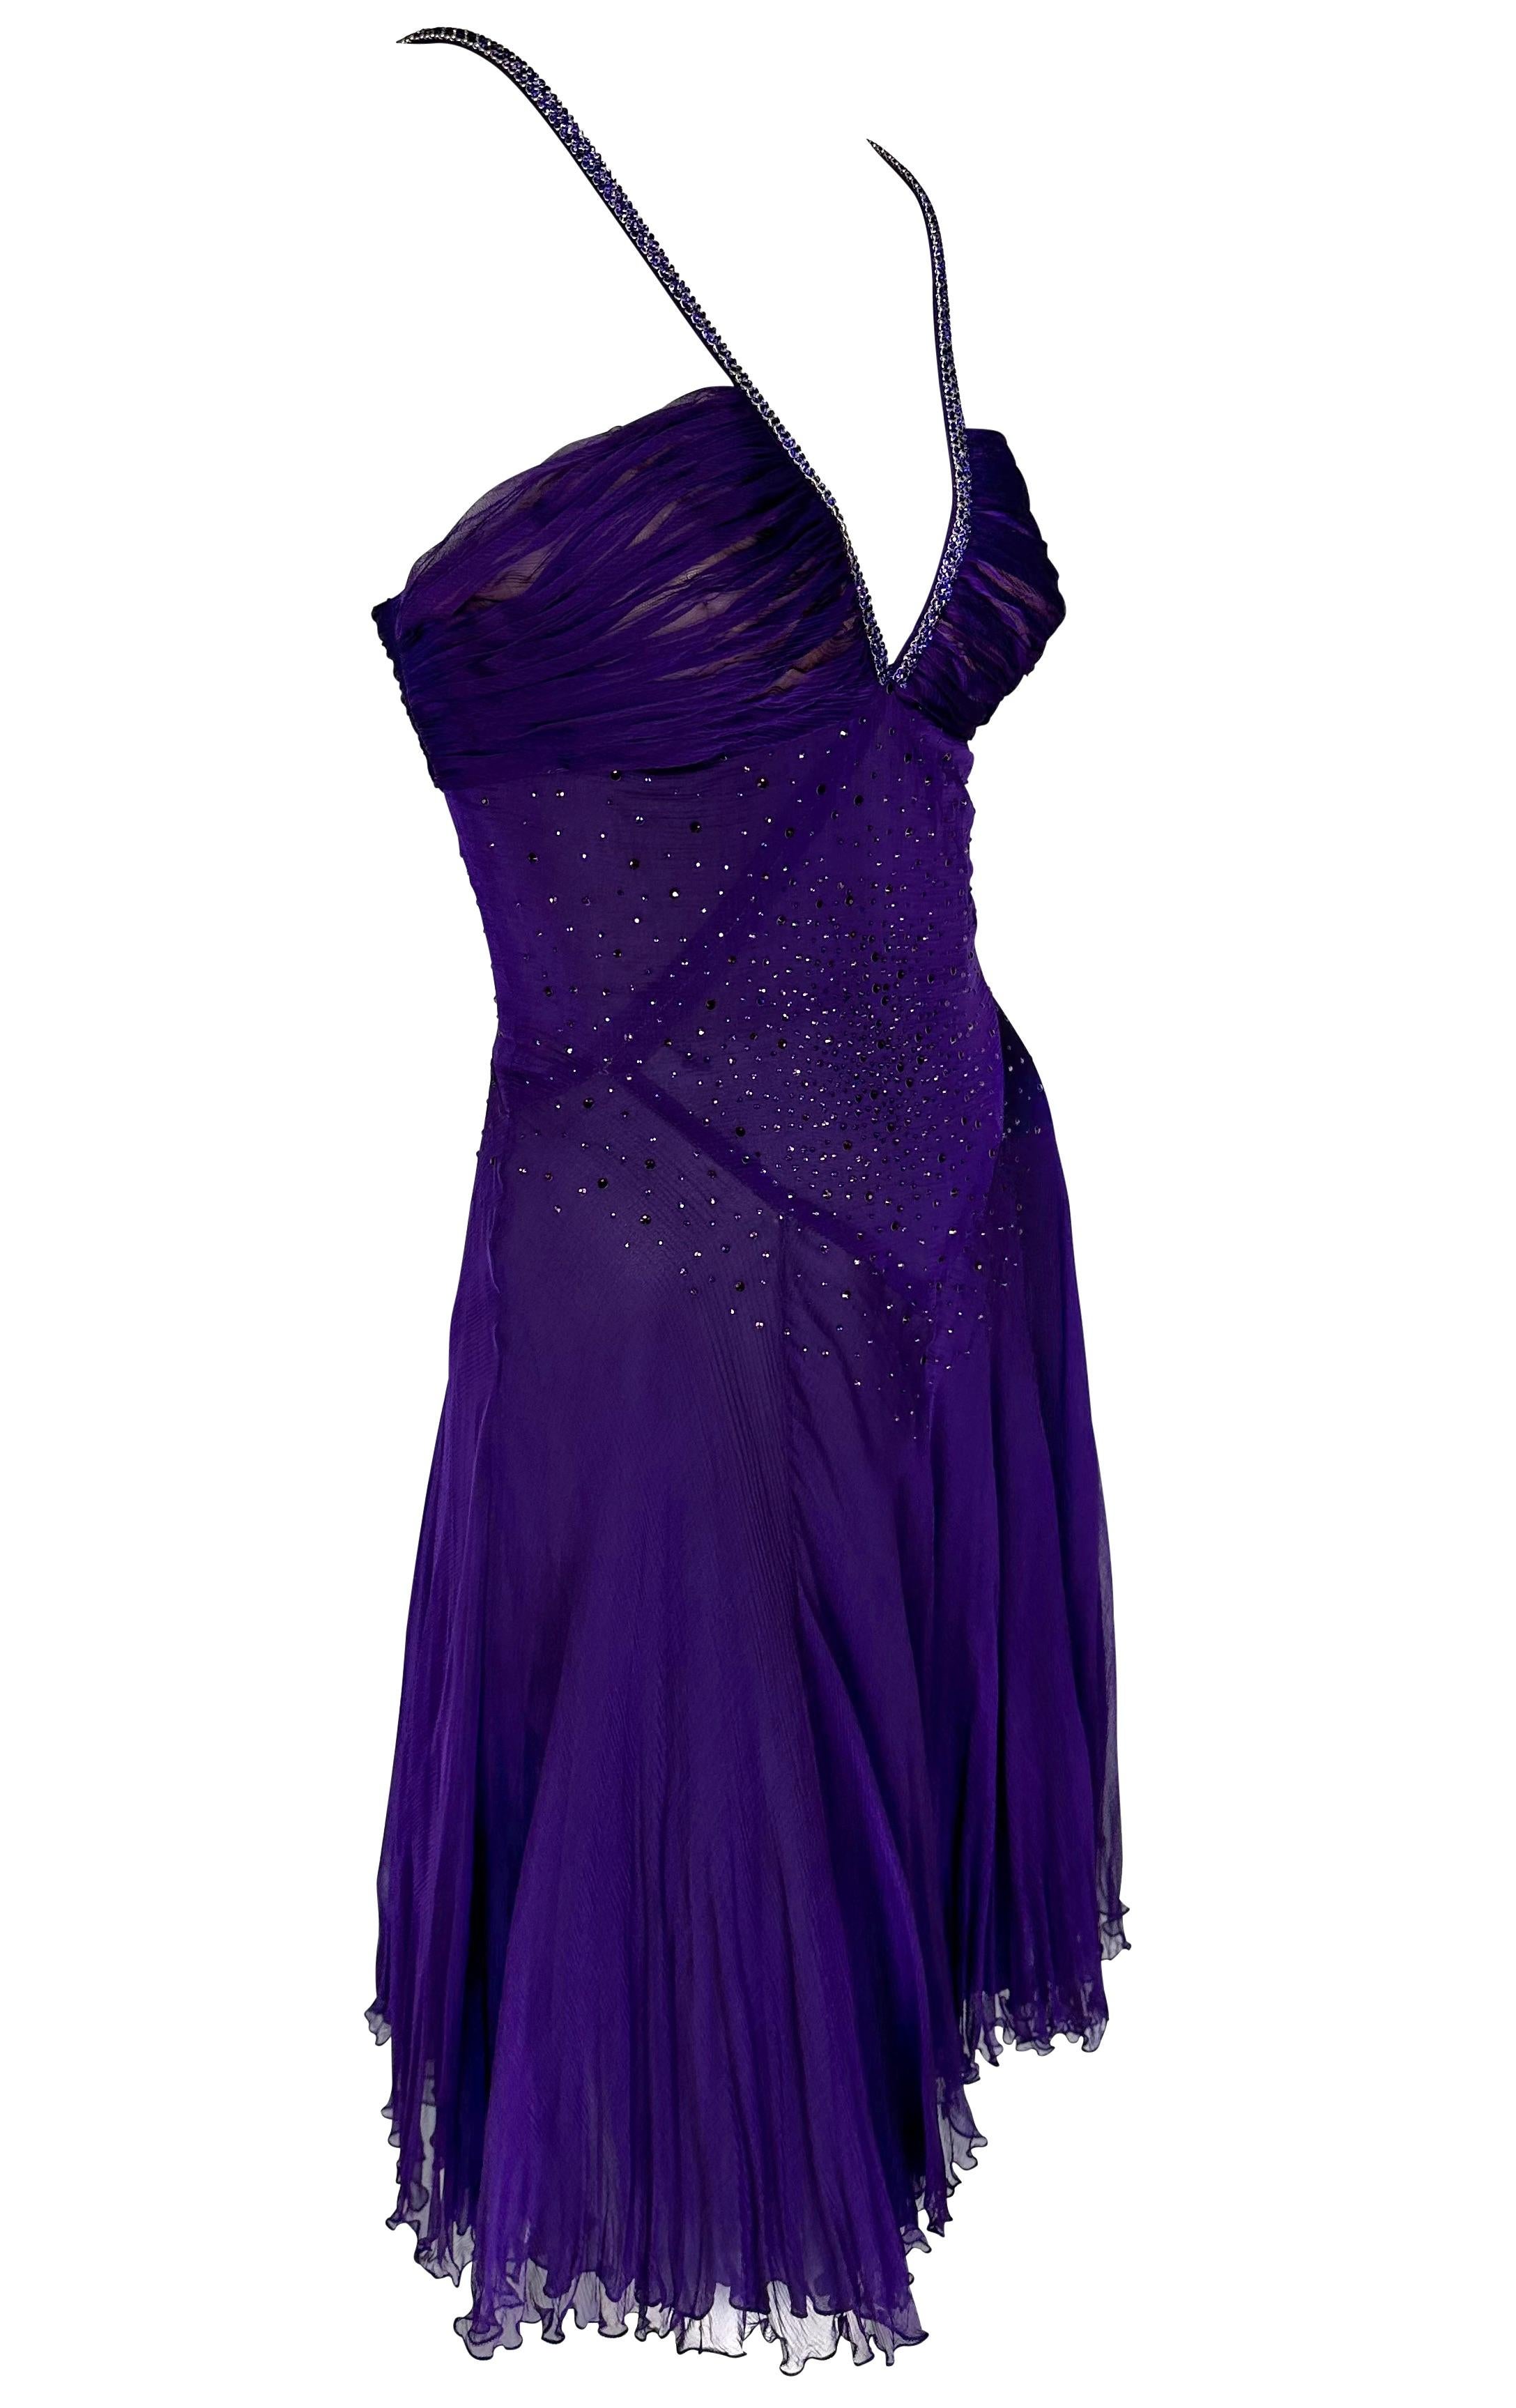 2000s Versace by Donatella Purple Rhinestone Sheer Chiffon Boned Flare Dress In Excellent Condition For Sale In West Hollywood, CA